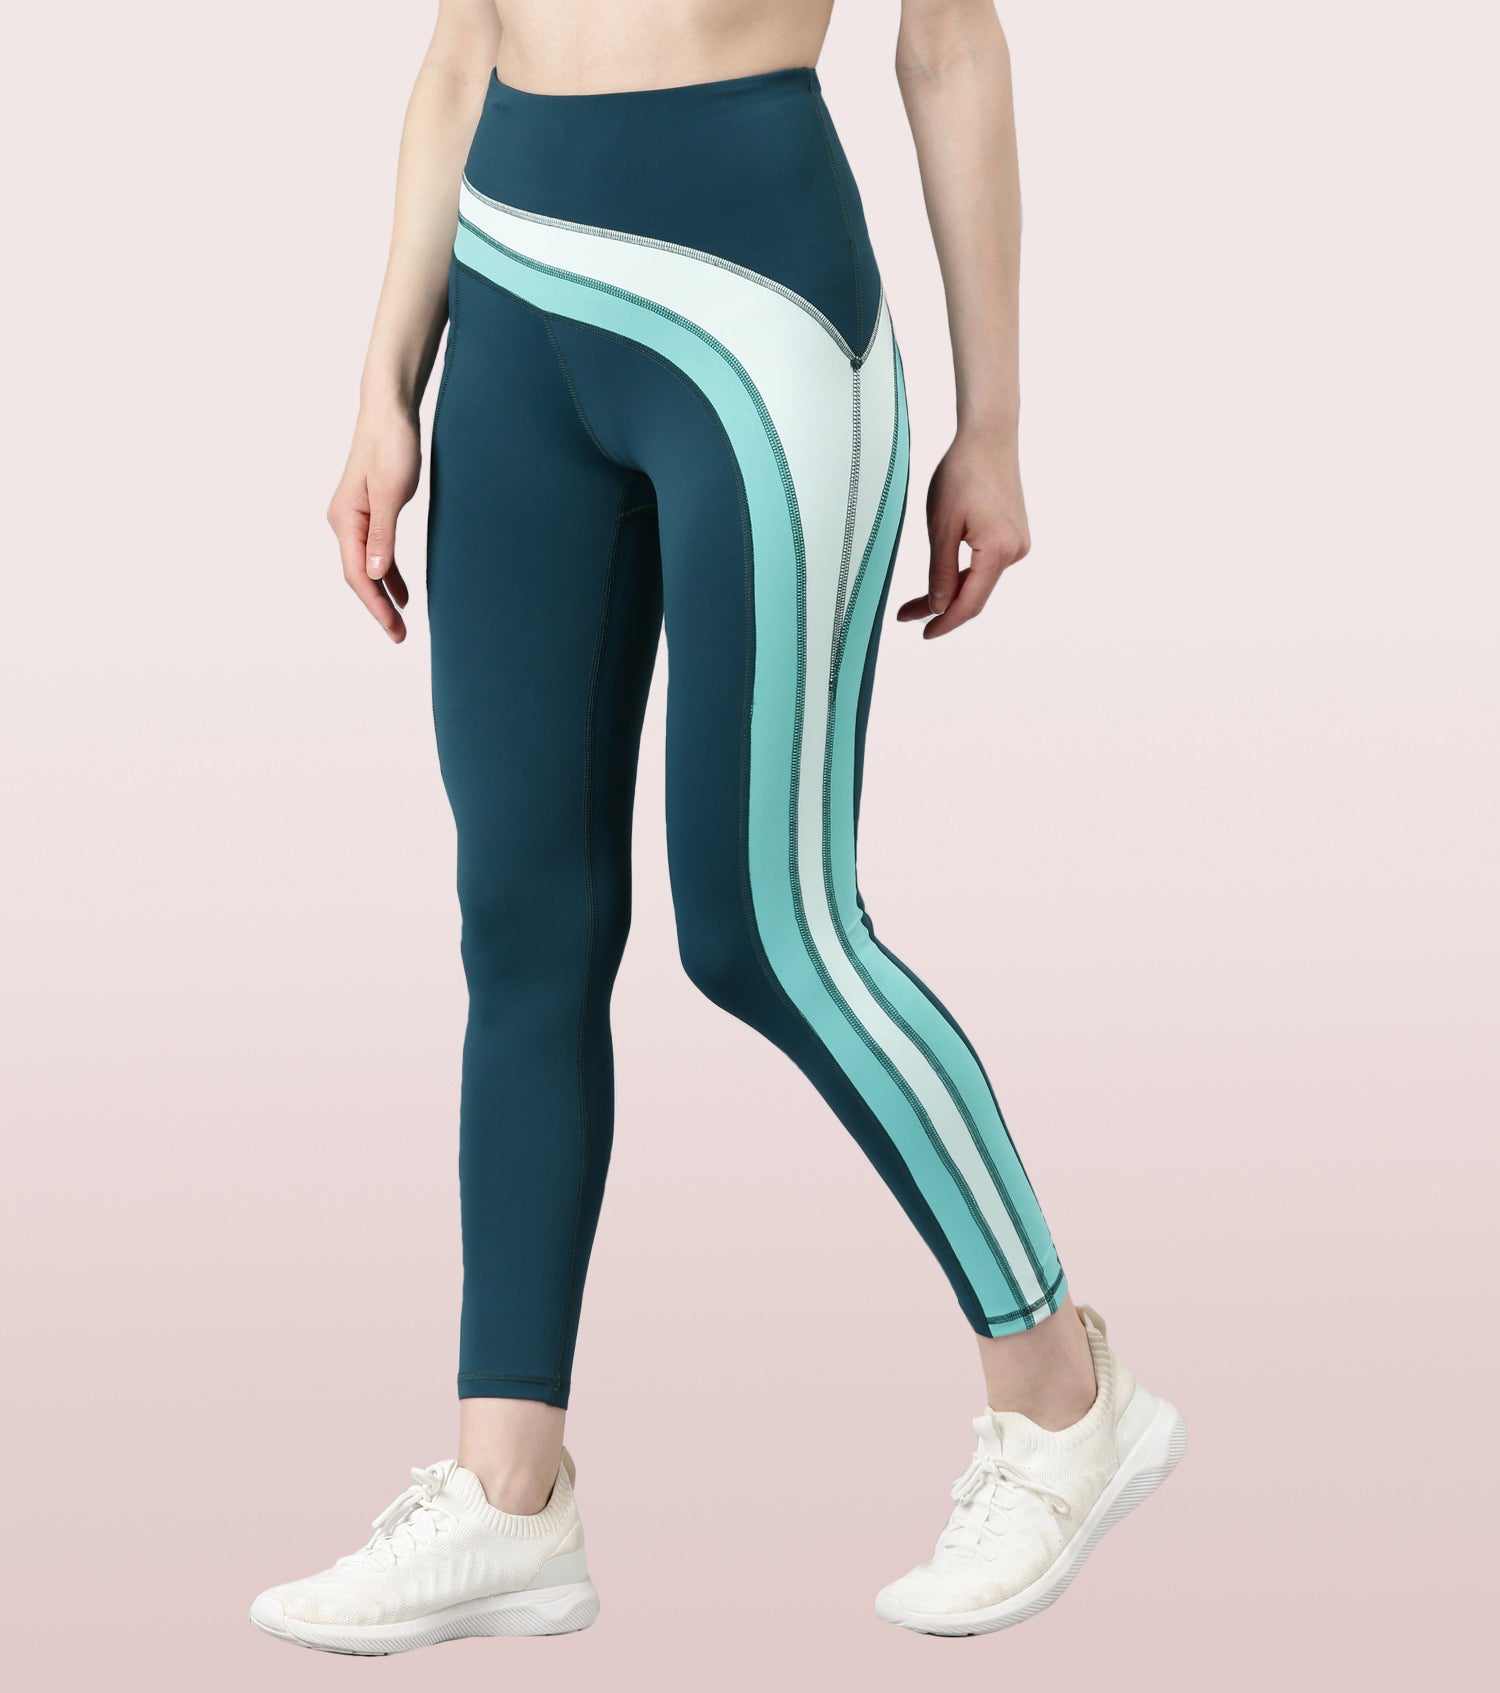 Active Solo Legging | Dry Fit High Waist Activewear Leggings